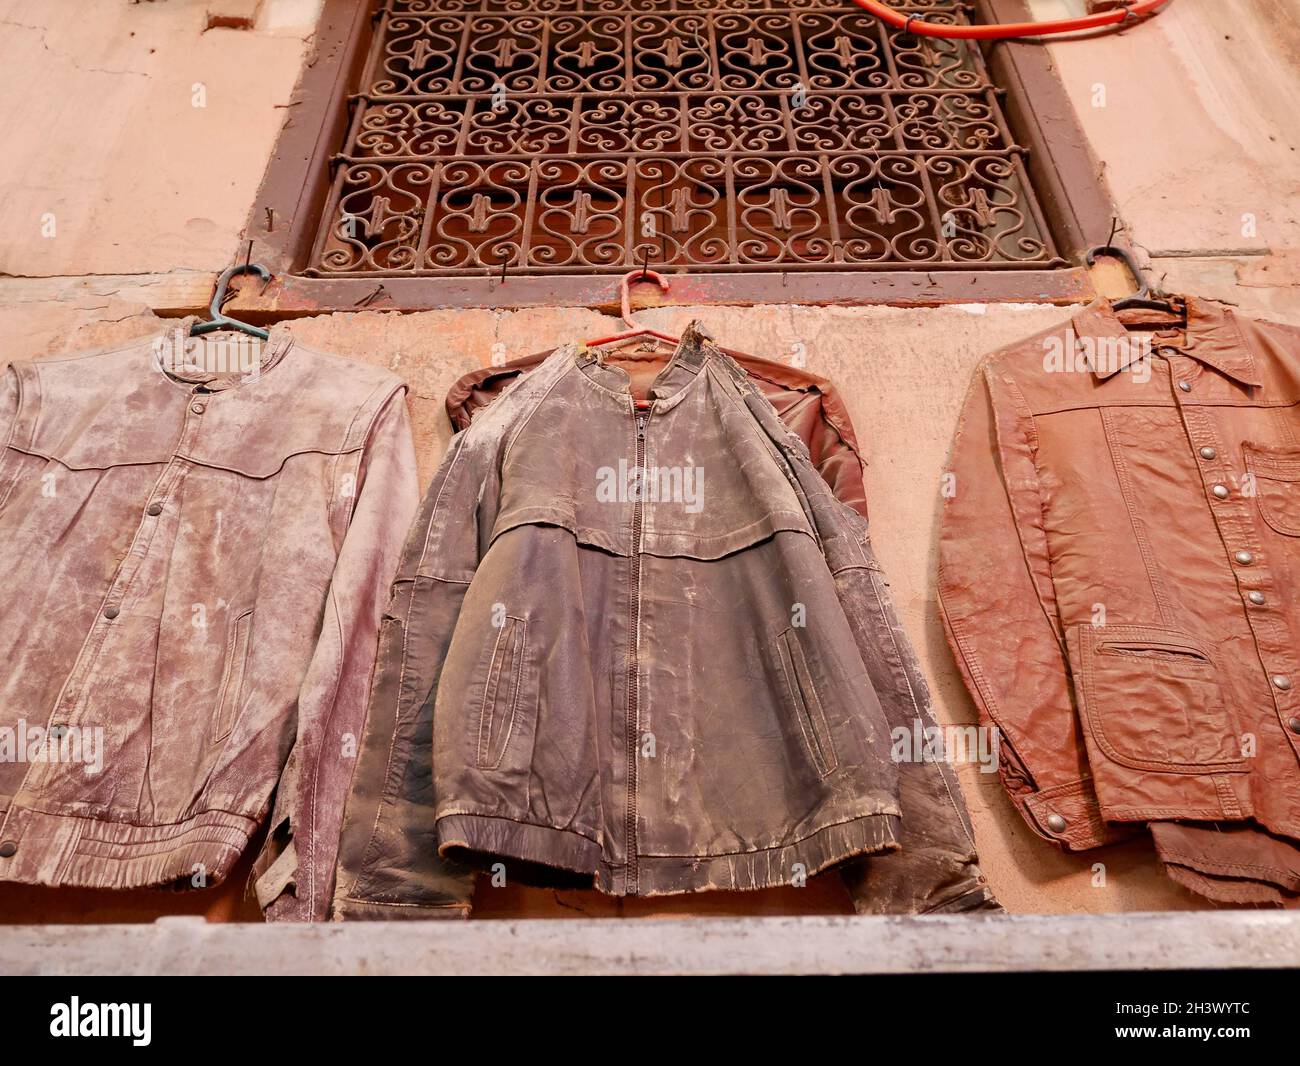 Vintage leather jackets for sale hanging in the streets of the Medina in Marrakech, Morocco. Stock Photo